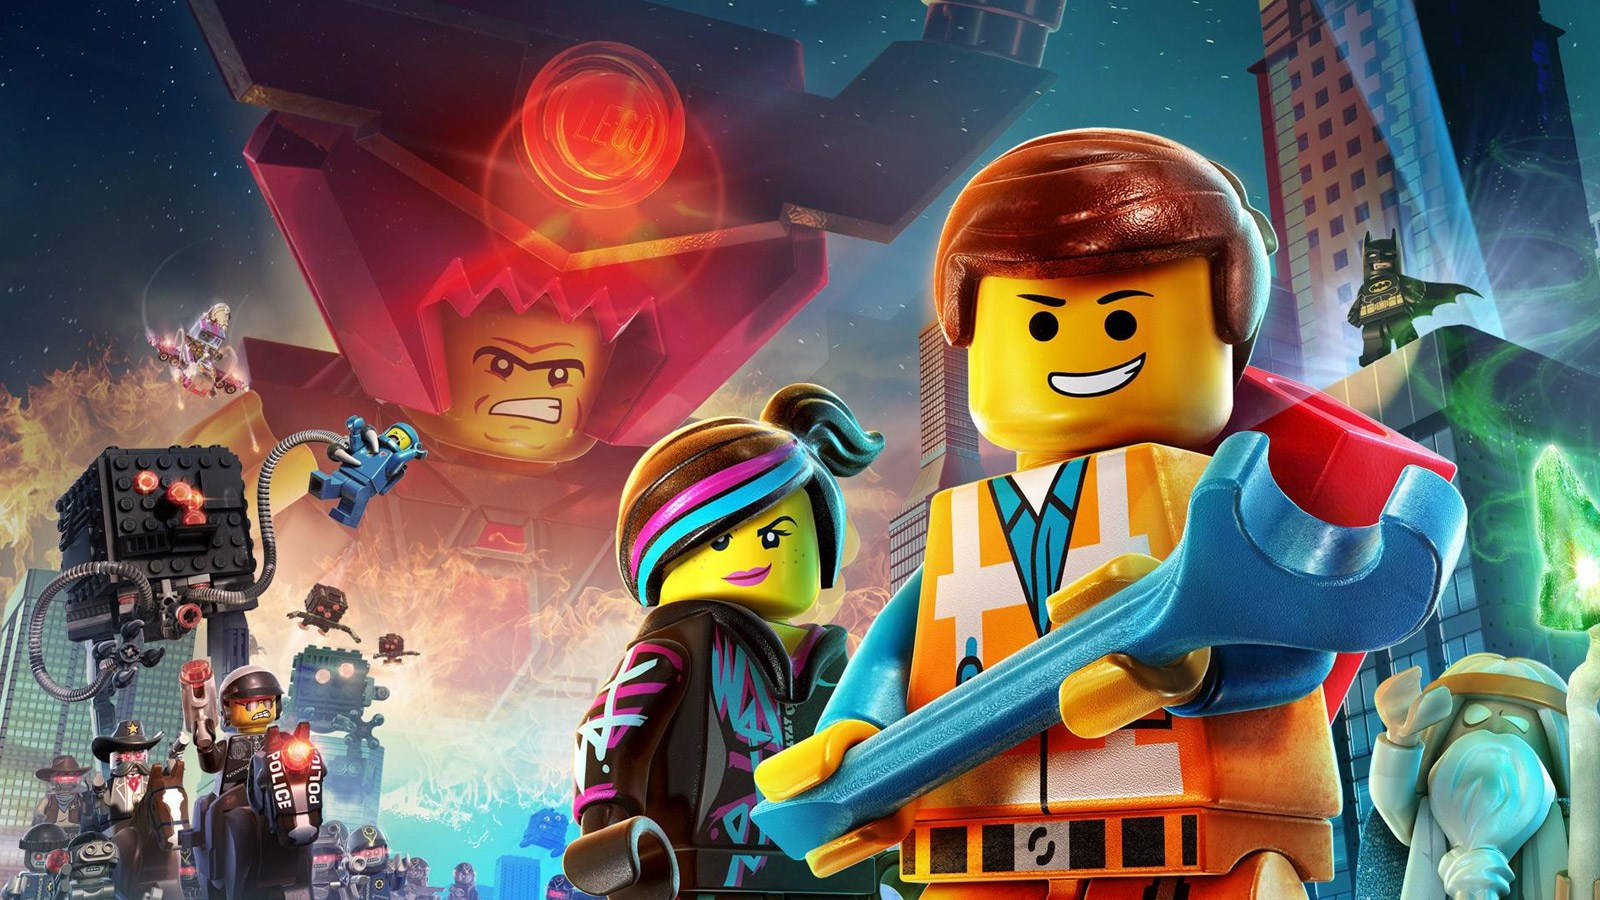 Awesome The Lego Movie Poster Characters